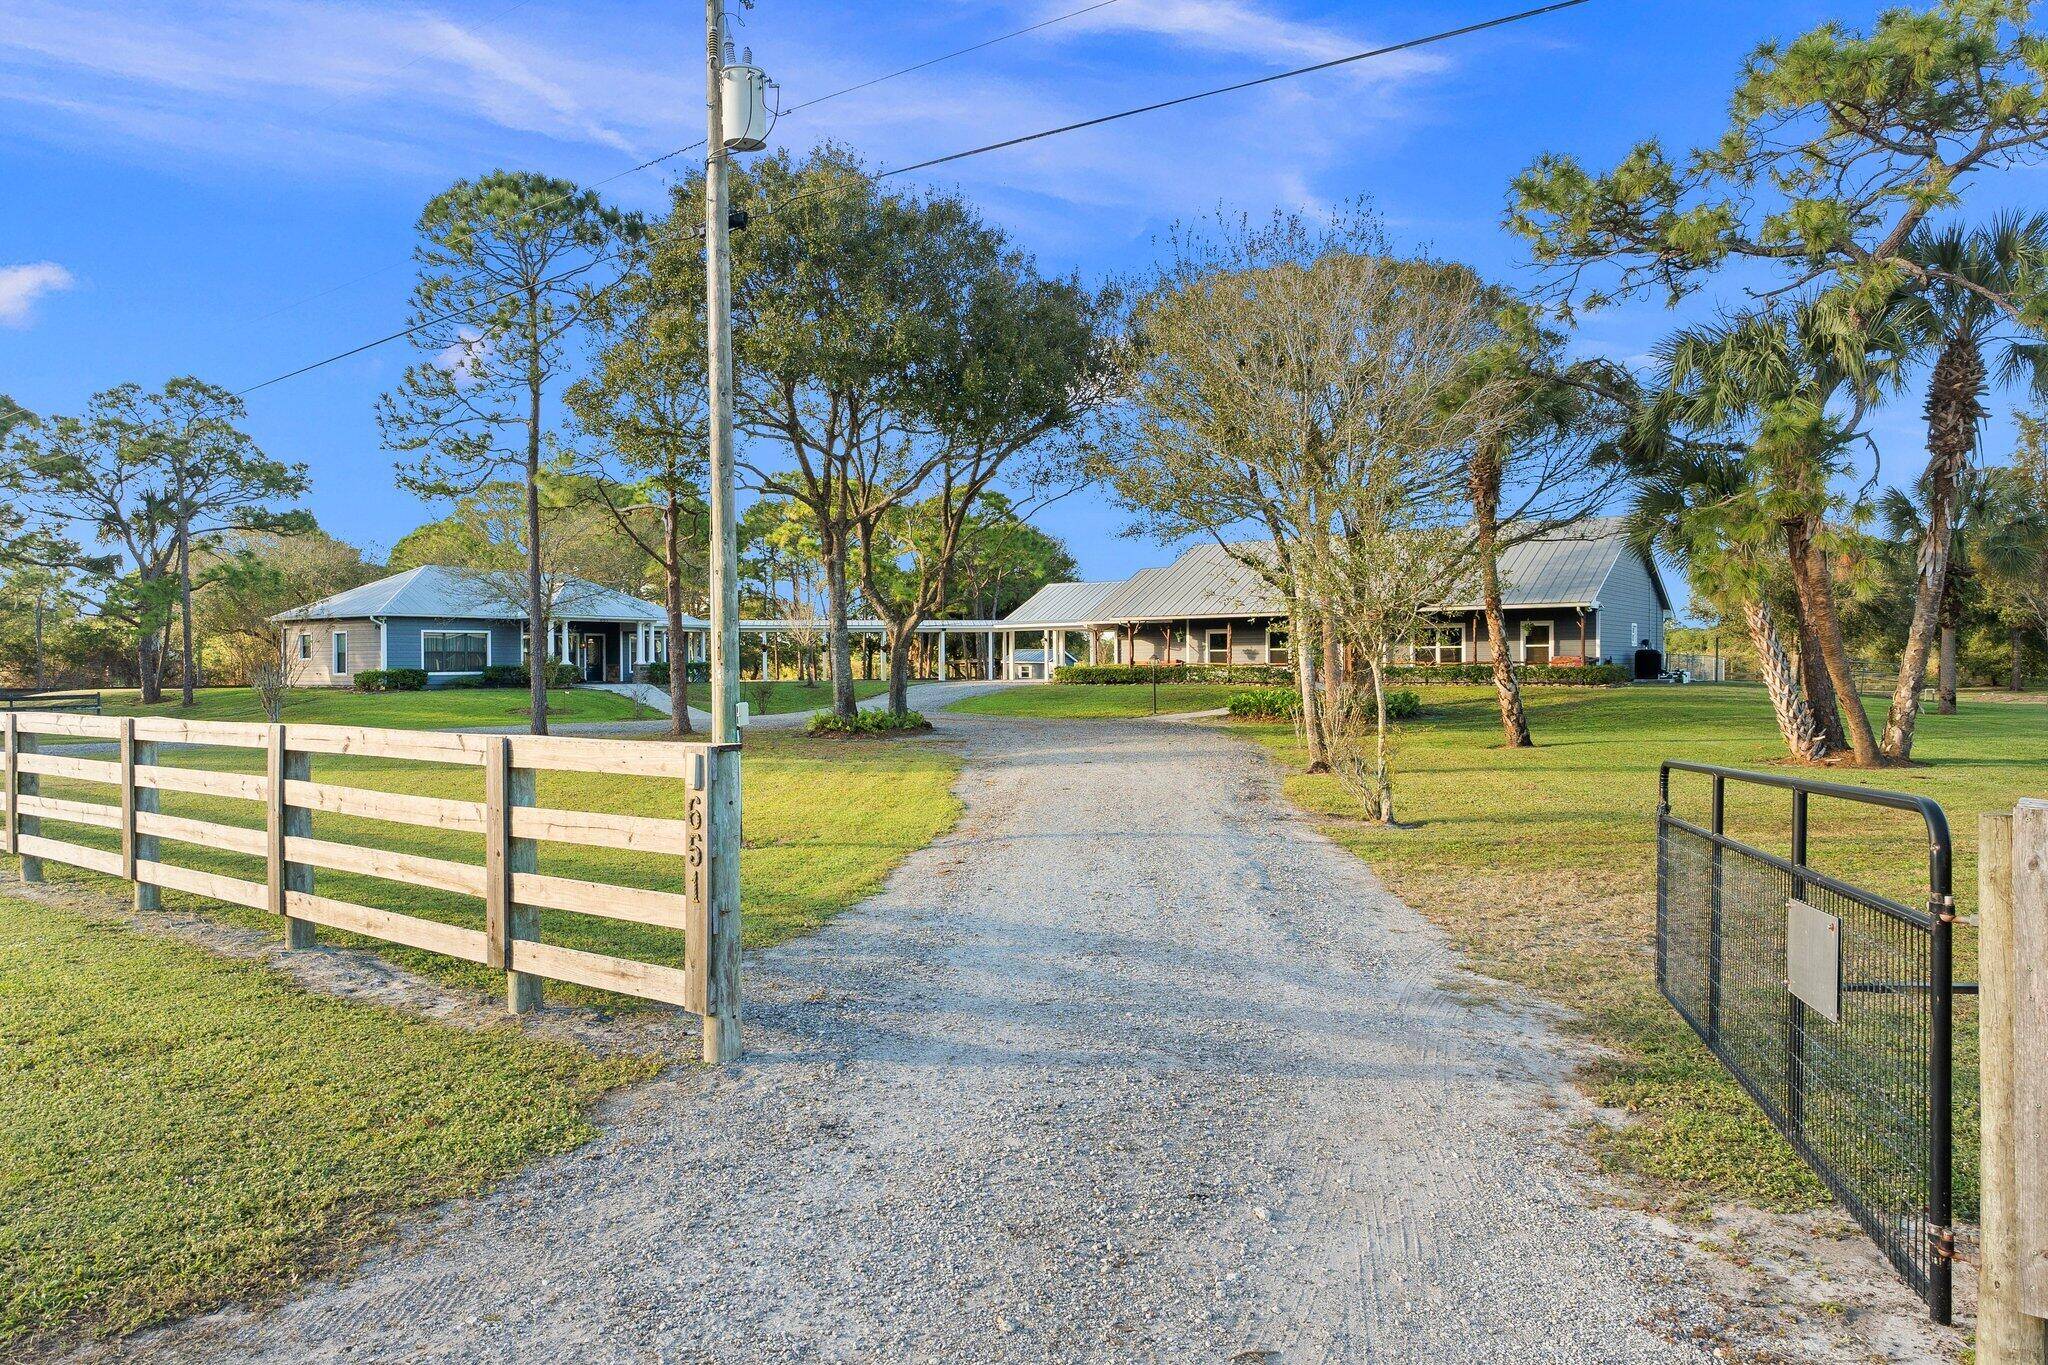 Beautifully maintained concrete block 3 2 pool home with separate custom 2 2 guest house, large barn, and additional detached storage.